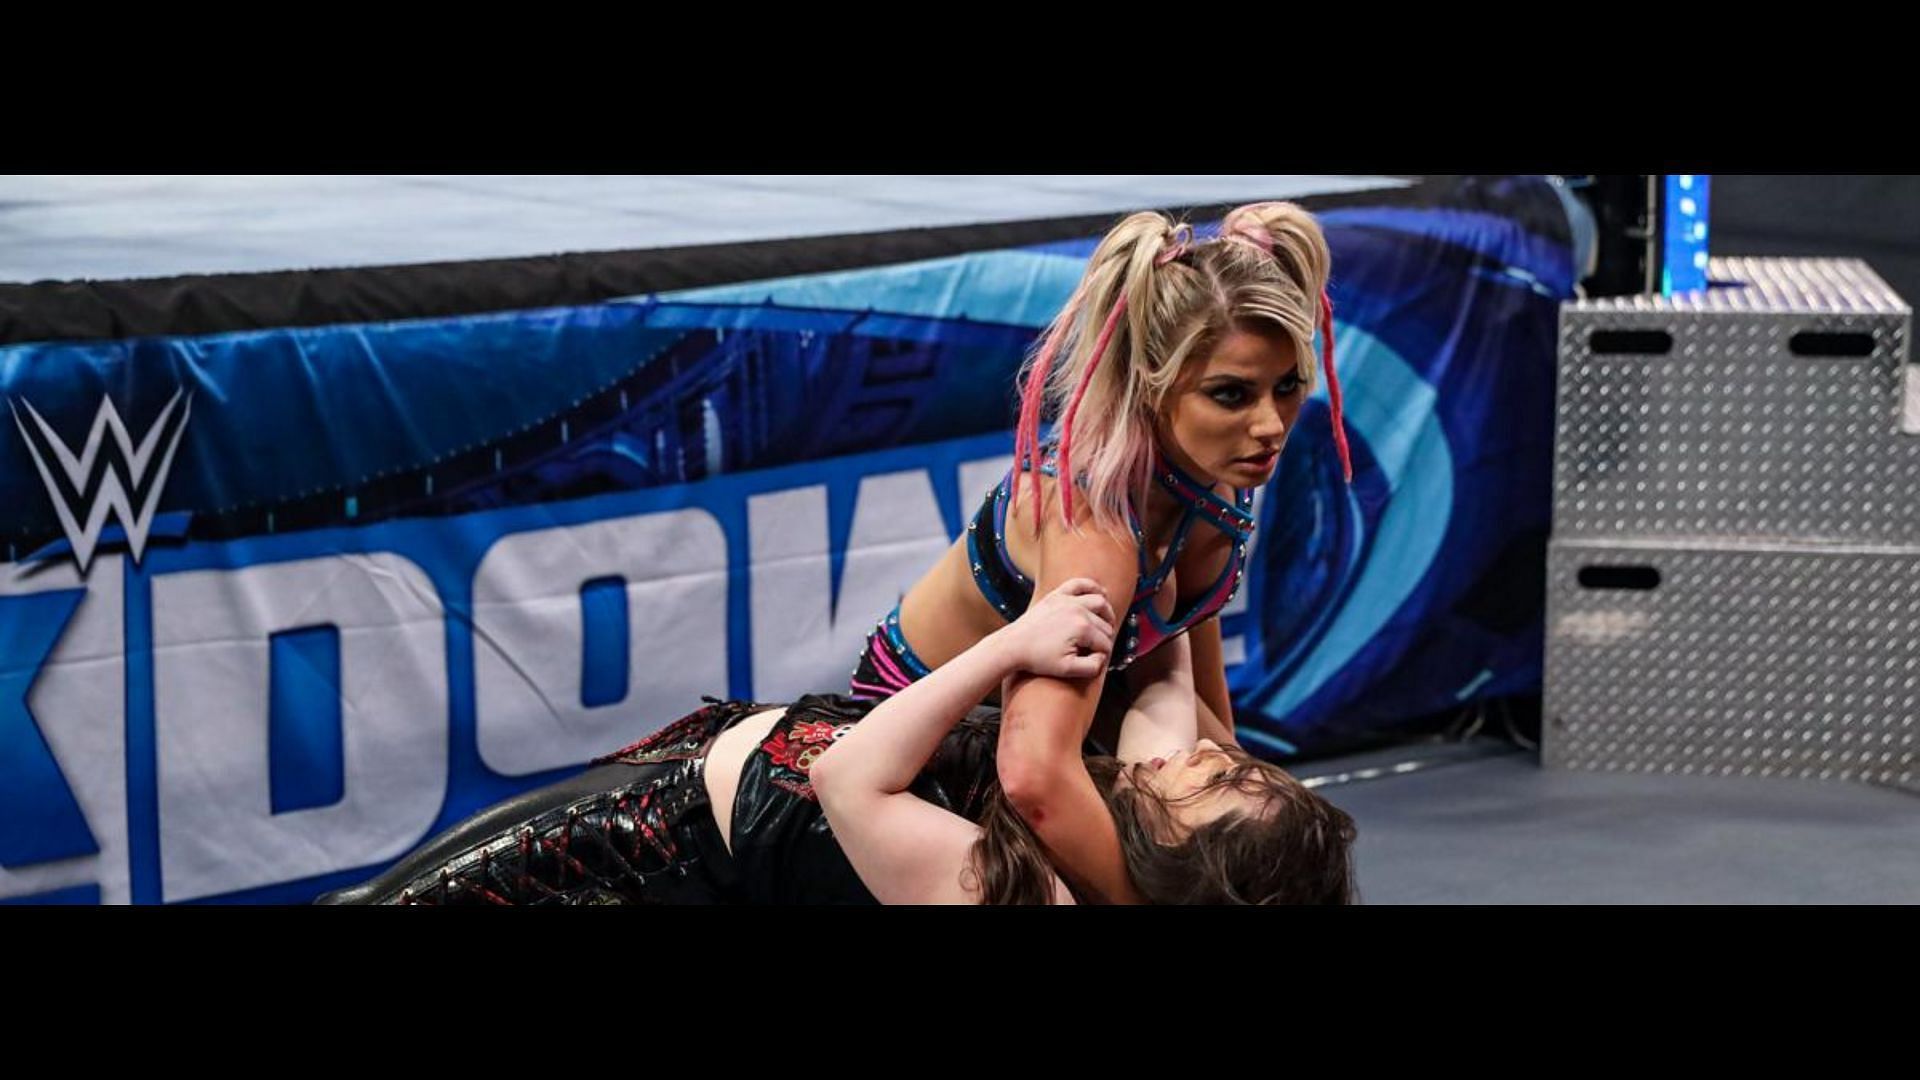 Alexa Bliss has been undergoing serious character change and there is someone that is looking to take her down